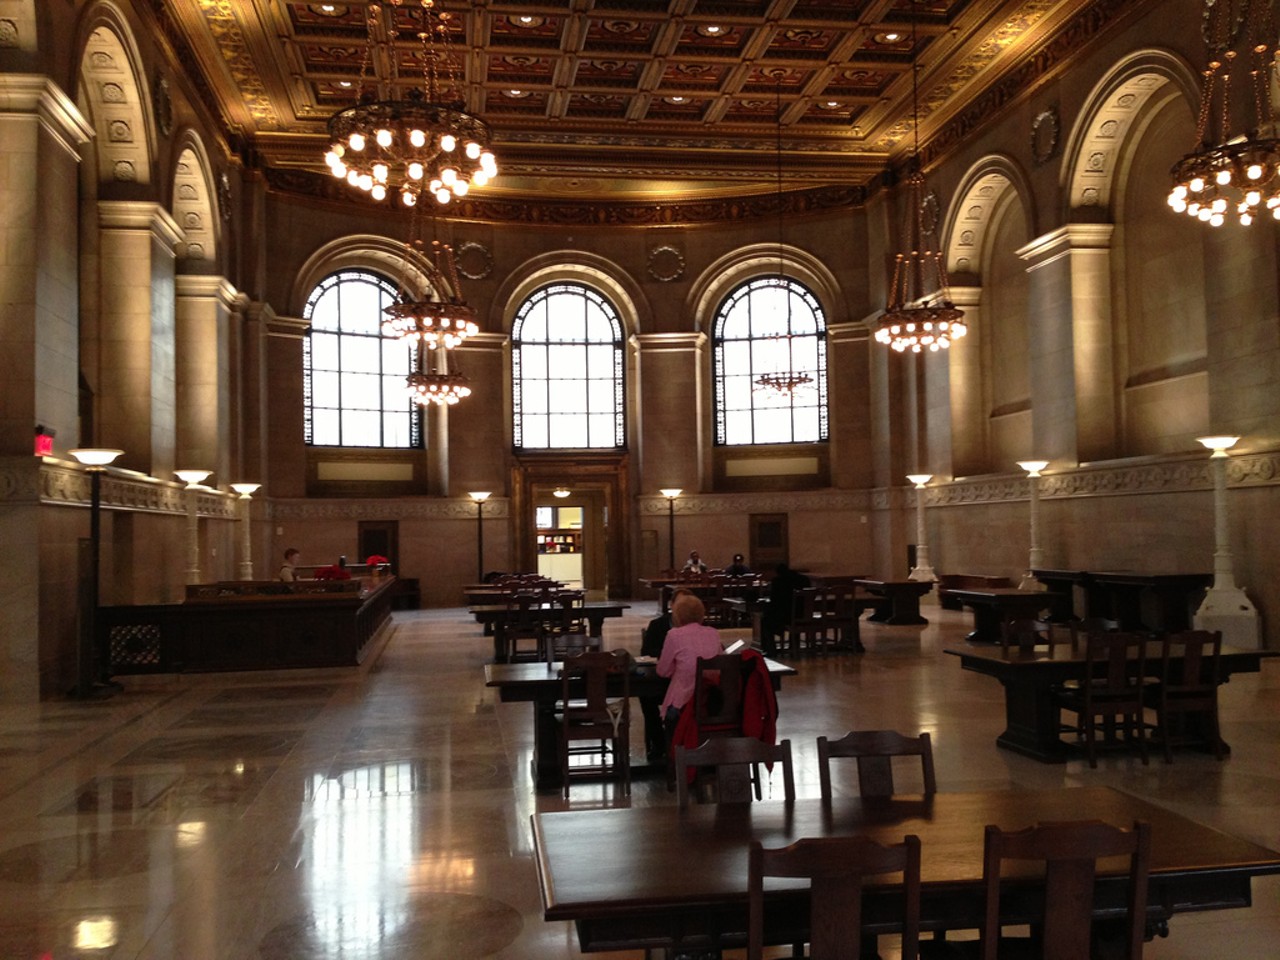 Entertain your inner bookworm at St. Louis Public Library.
1301 Olive Street
St. Louis, MO   63103
(314) 241-2288
If books aren't up your alley, you can still have fun exploring the building -- it's simply breathtaking thanks to a $70 million restoration. You can even take a tour to get more of the scoop on this amazing landmark. Photo courtesy of Flickr / Chris Yunker.